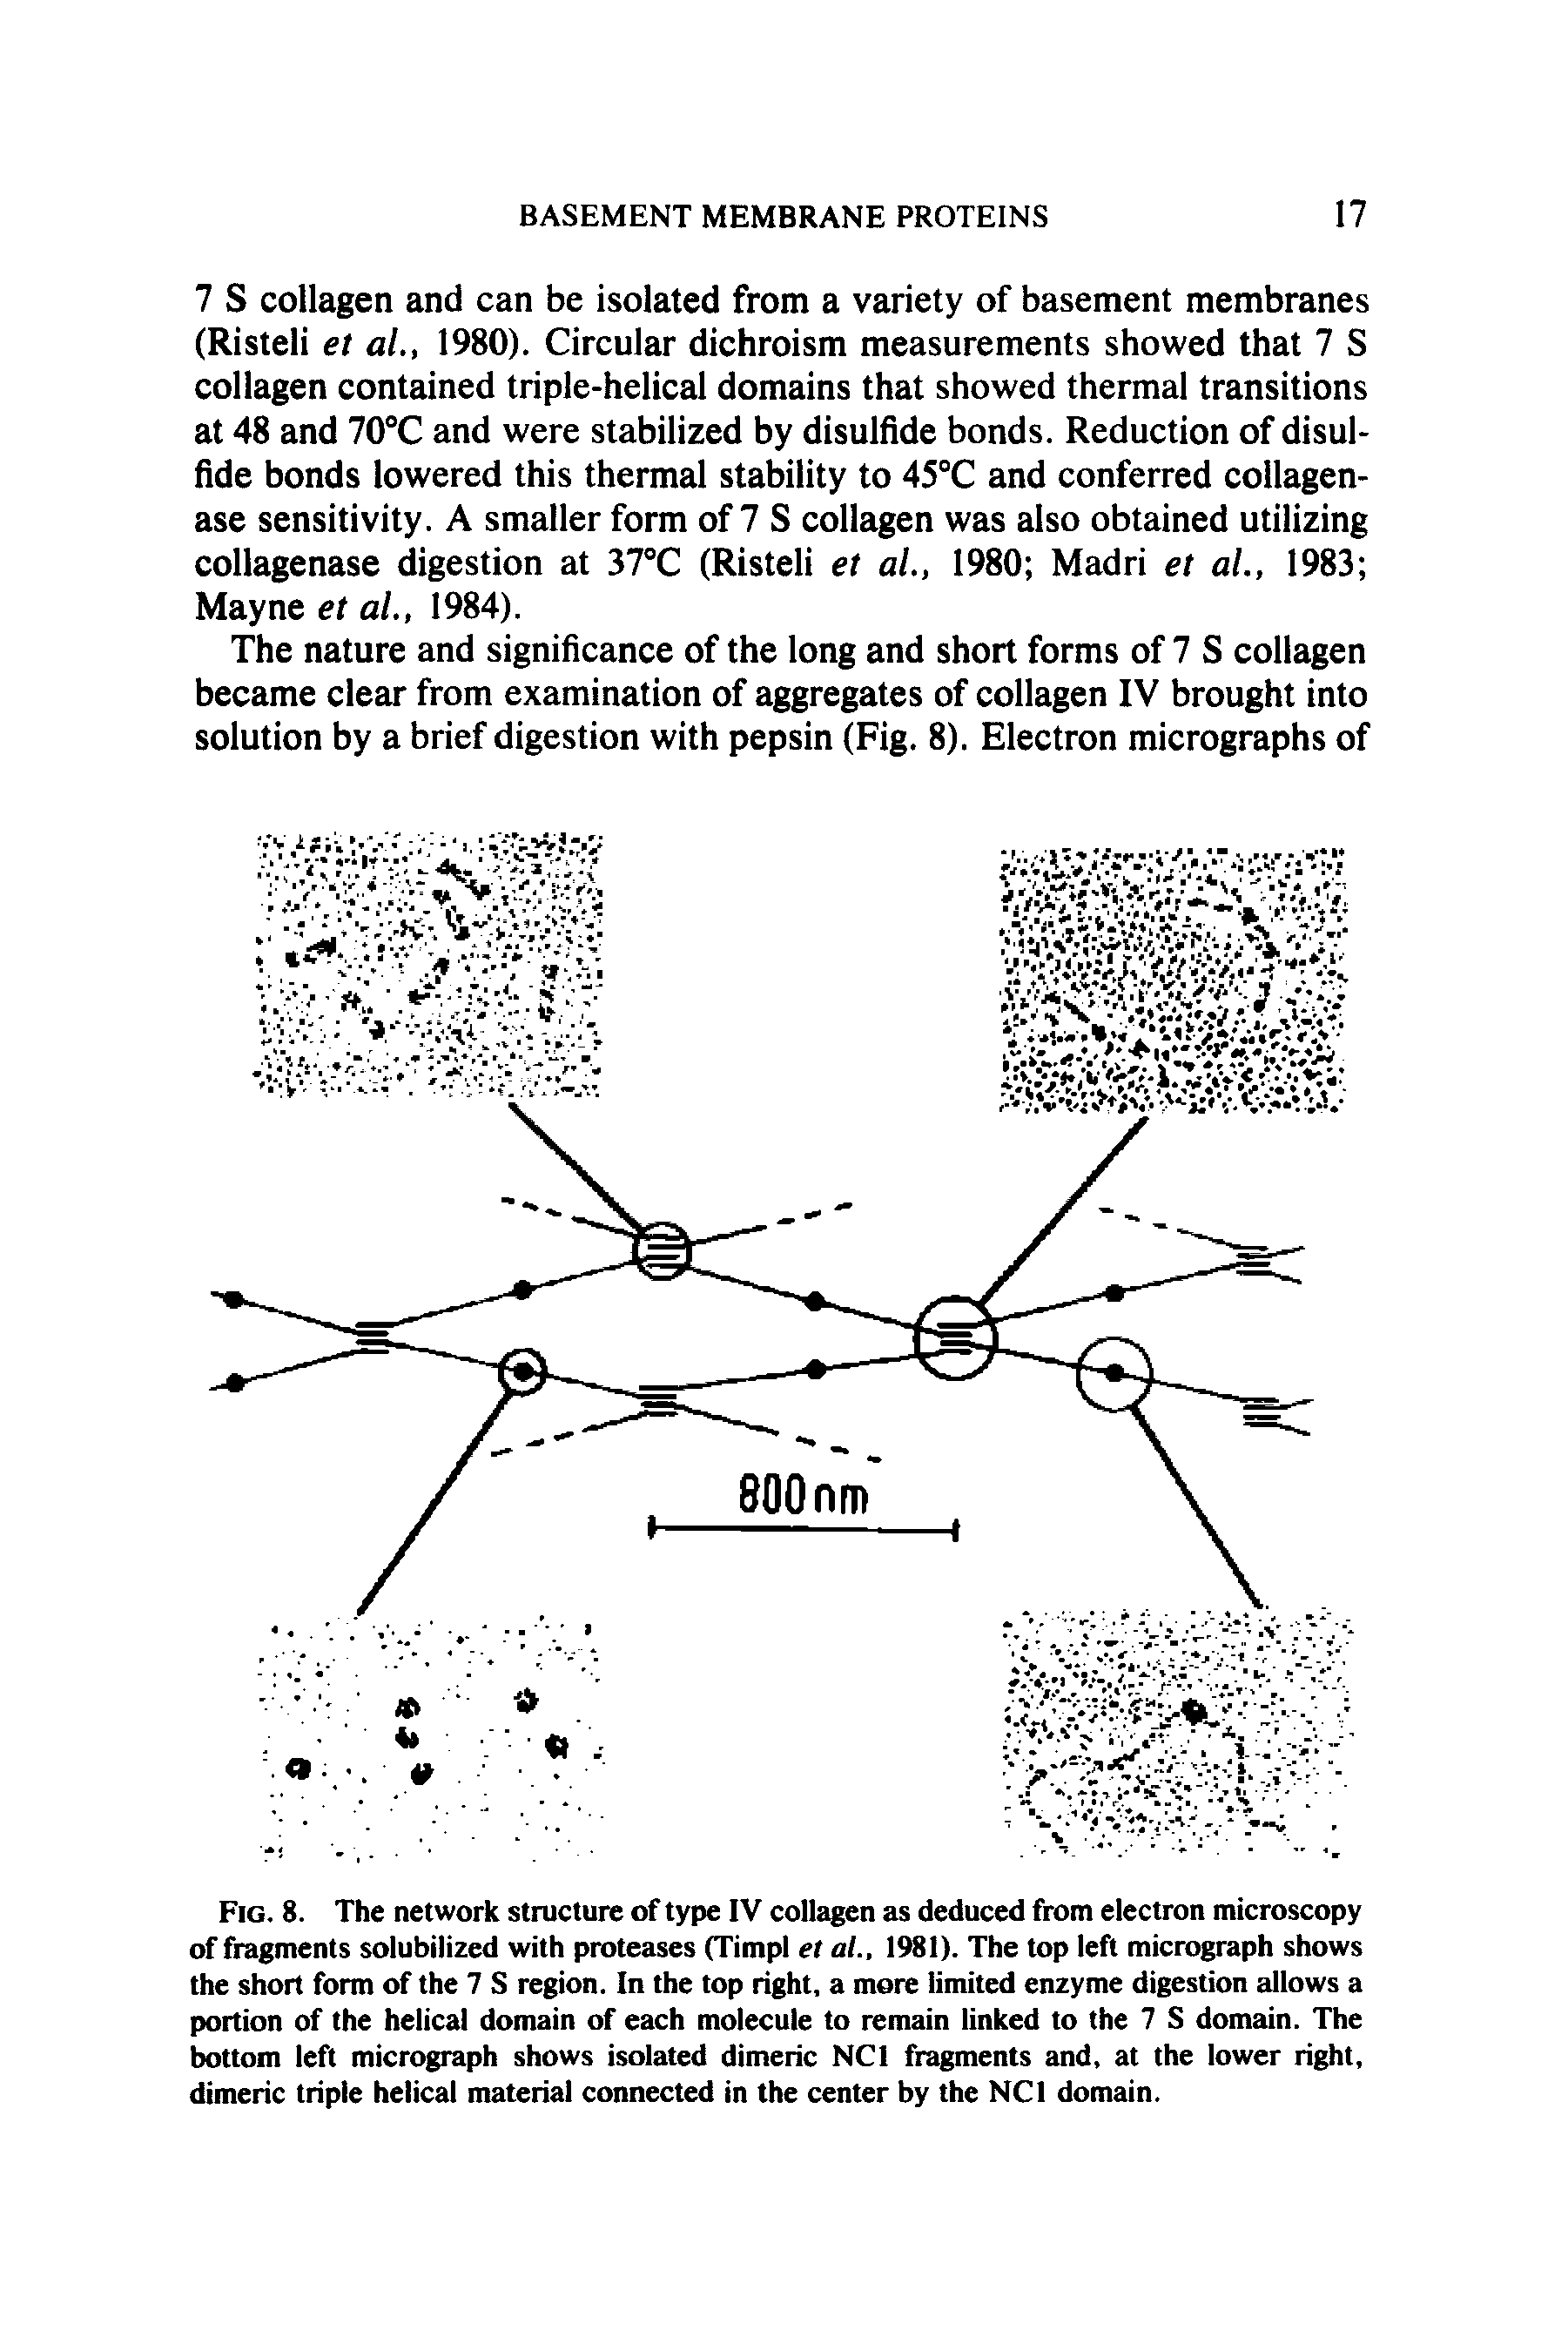 Fig. 8. The network structure of type IV collagen as deduced from electron microscopy of fragments solubilized with proteases (Timpl et at., 1981). The top left micrograph shows the short form of the 7 S region. In the top right, a more limited enzyme digestion allows a portion of the helical domain of each molecule to remain linked to the 7 S domain. The bottom left micrograph shows isolated dimeric NCI fragments and, at the lower right, dimeric triple helical material connected in the center by the NCI domain.